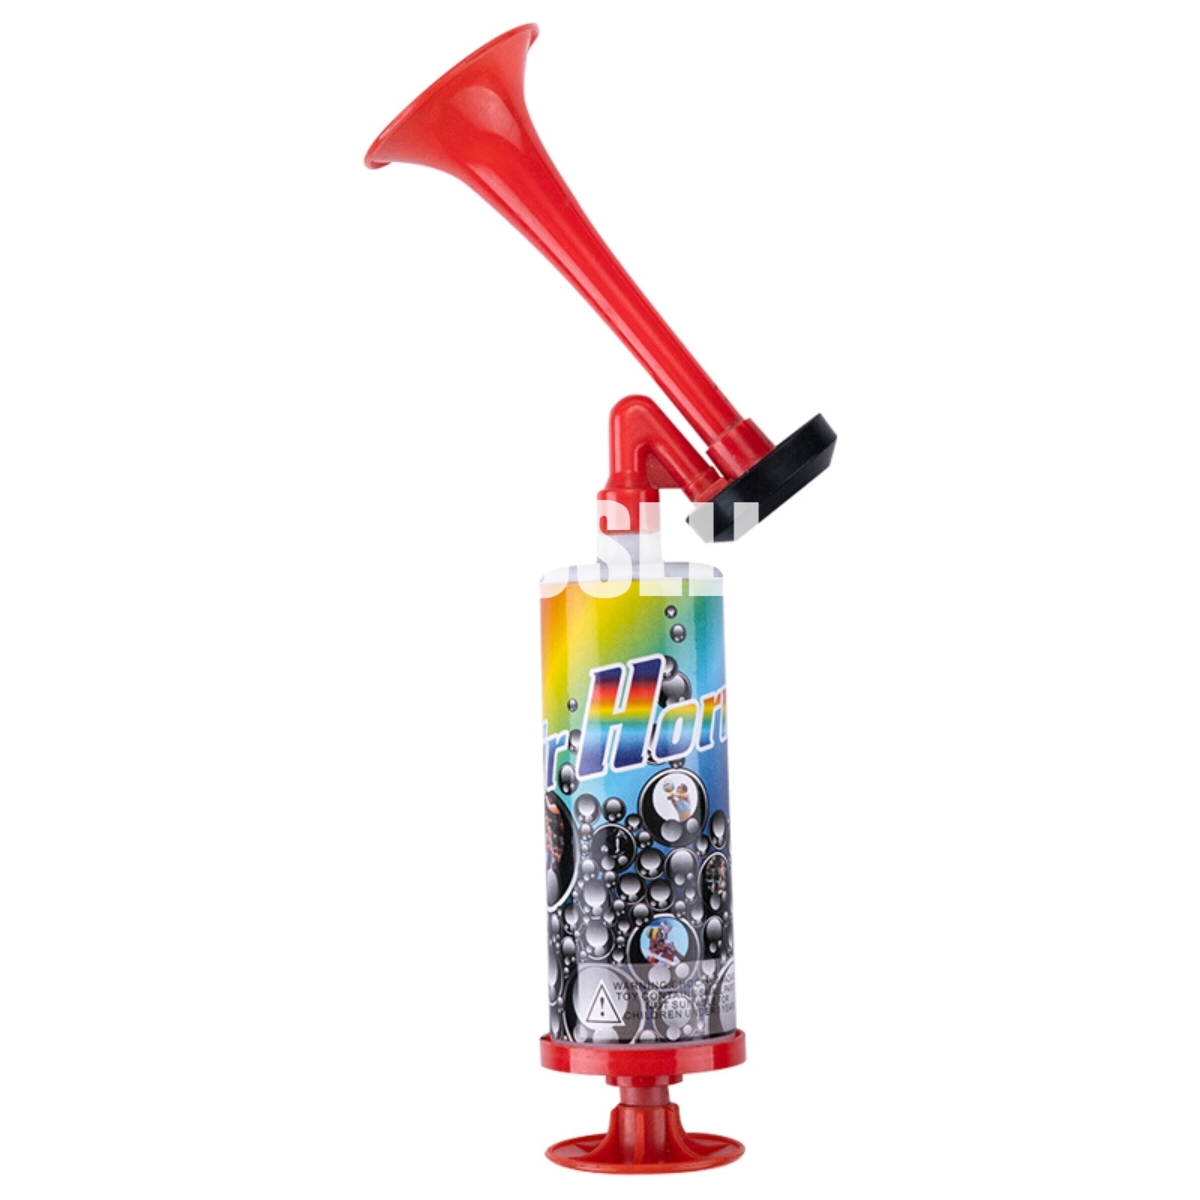 Best Football Air Horn Hand Push Pump for sale -  YIWUSELL, HOME, KITCHEN, PET, CAMPING, STATIONERY, TOOLS